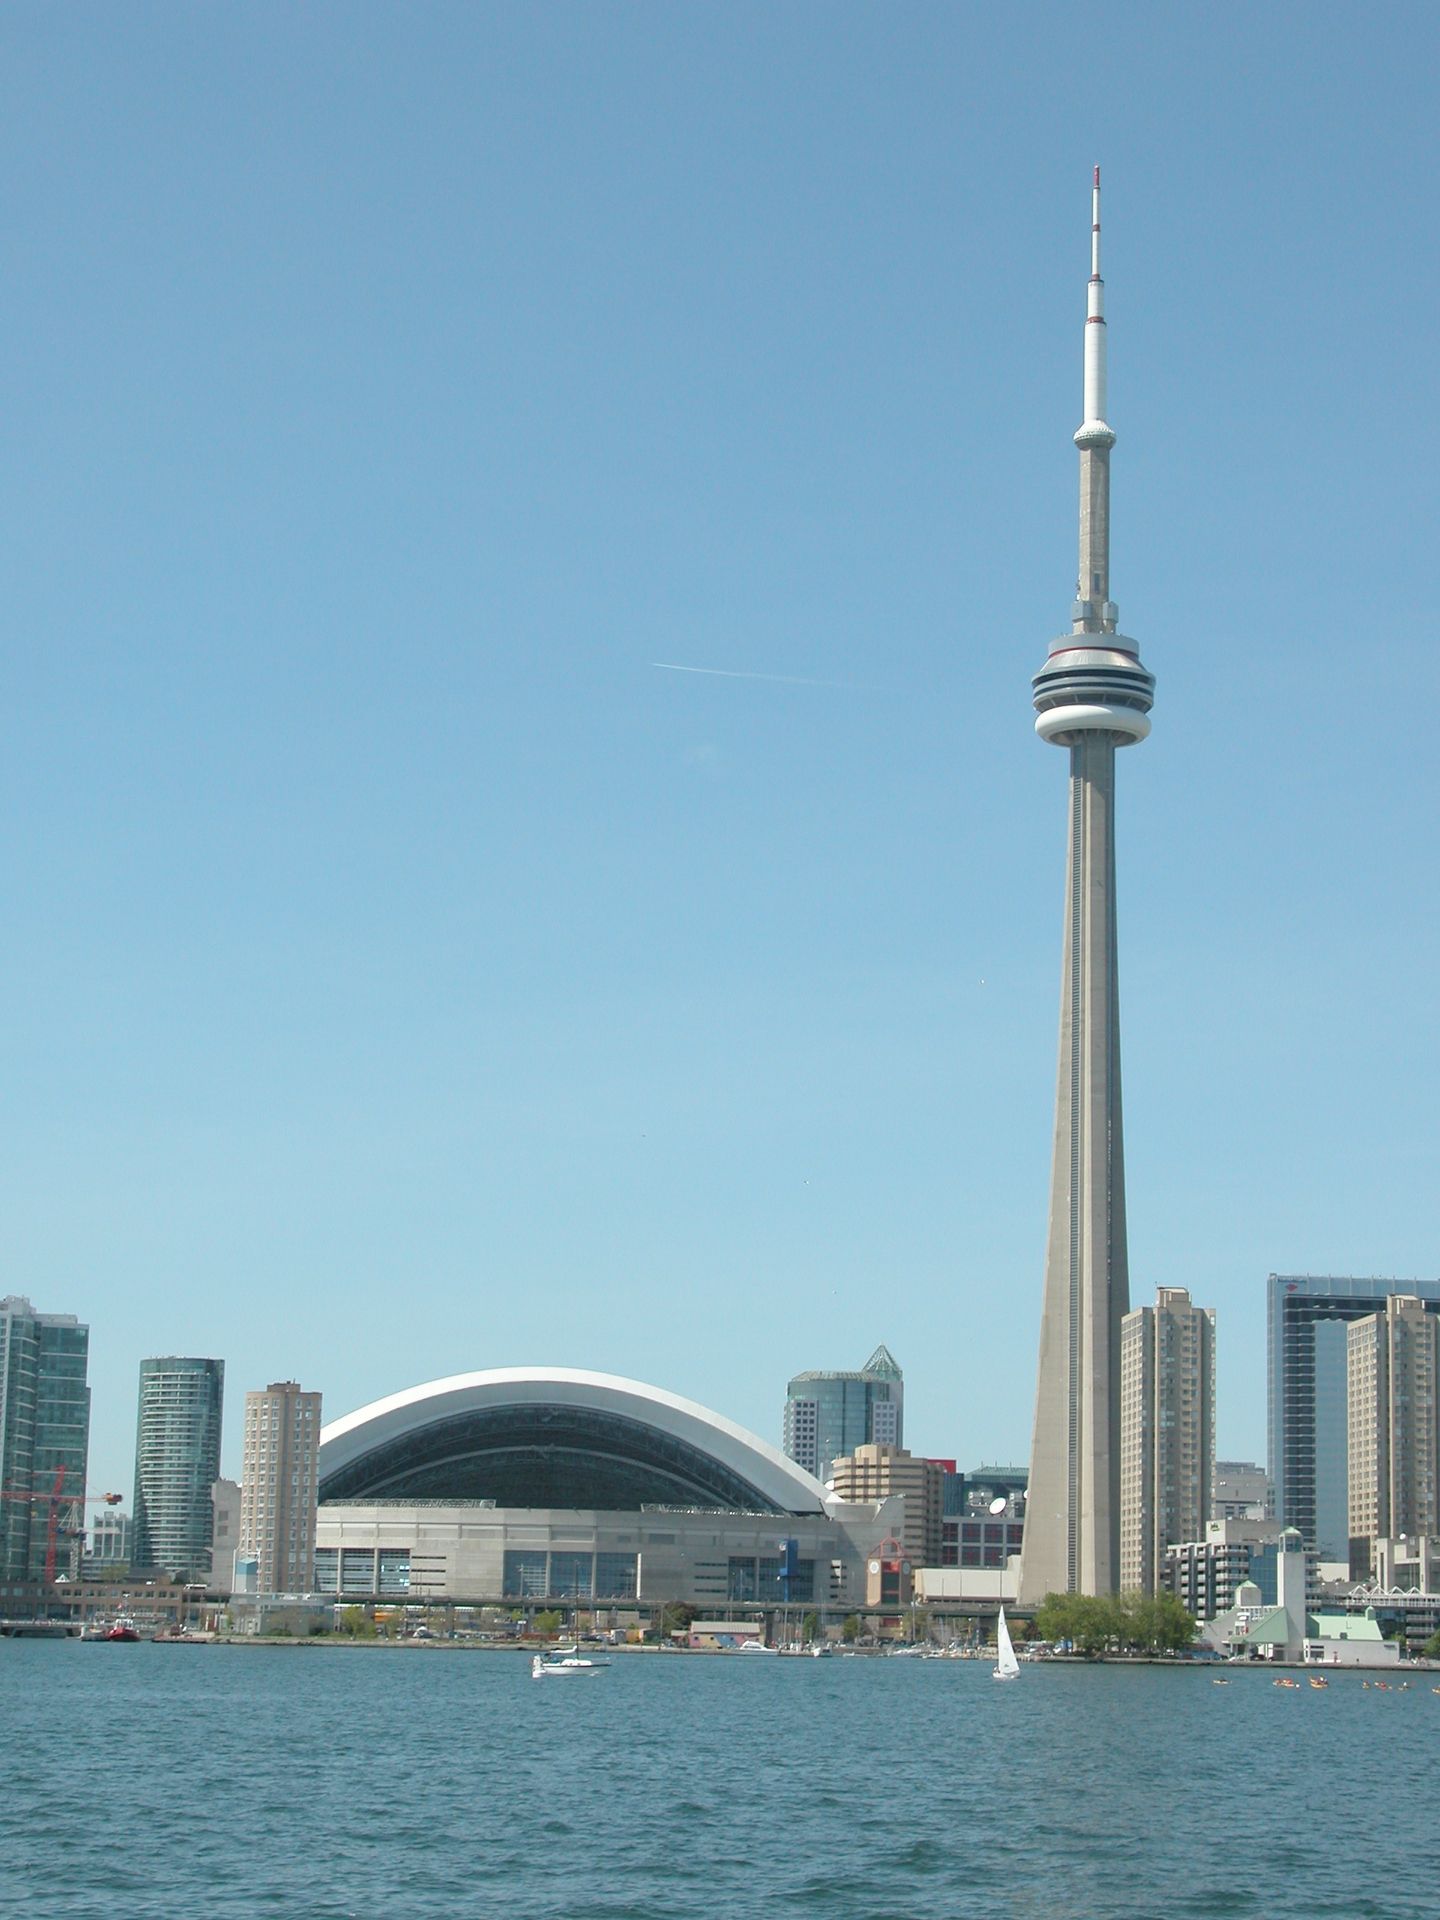 Toronto's CN Tower, A Visitor's Guide